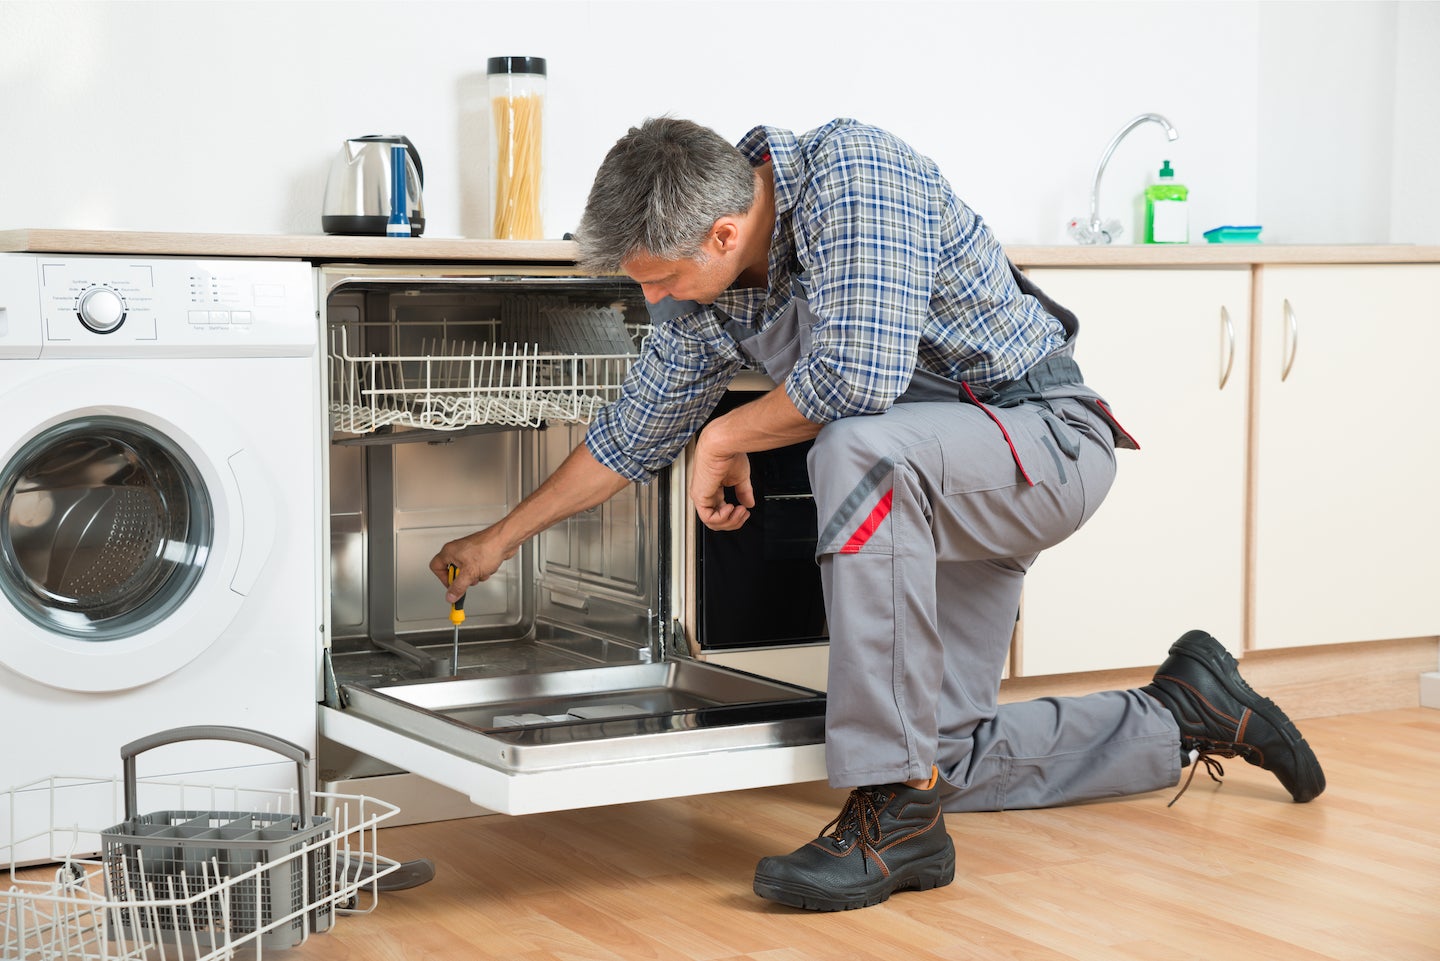 Repairman reviews dishwasher repairs with Los Angeles couple.